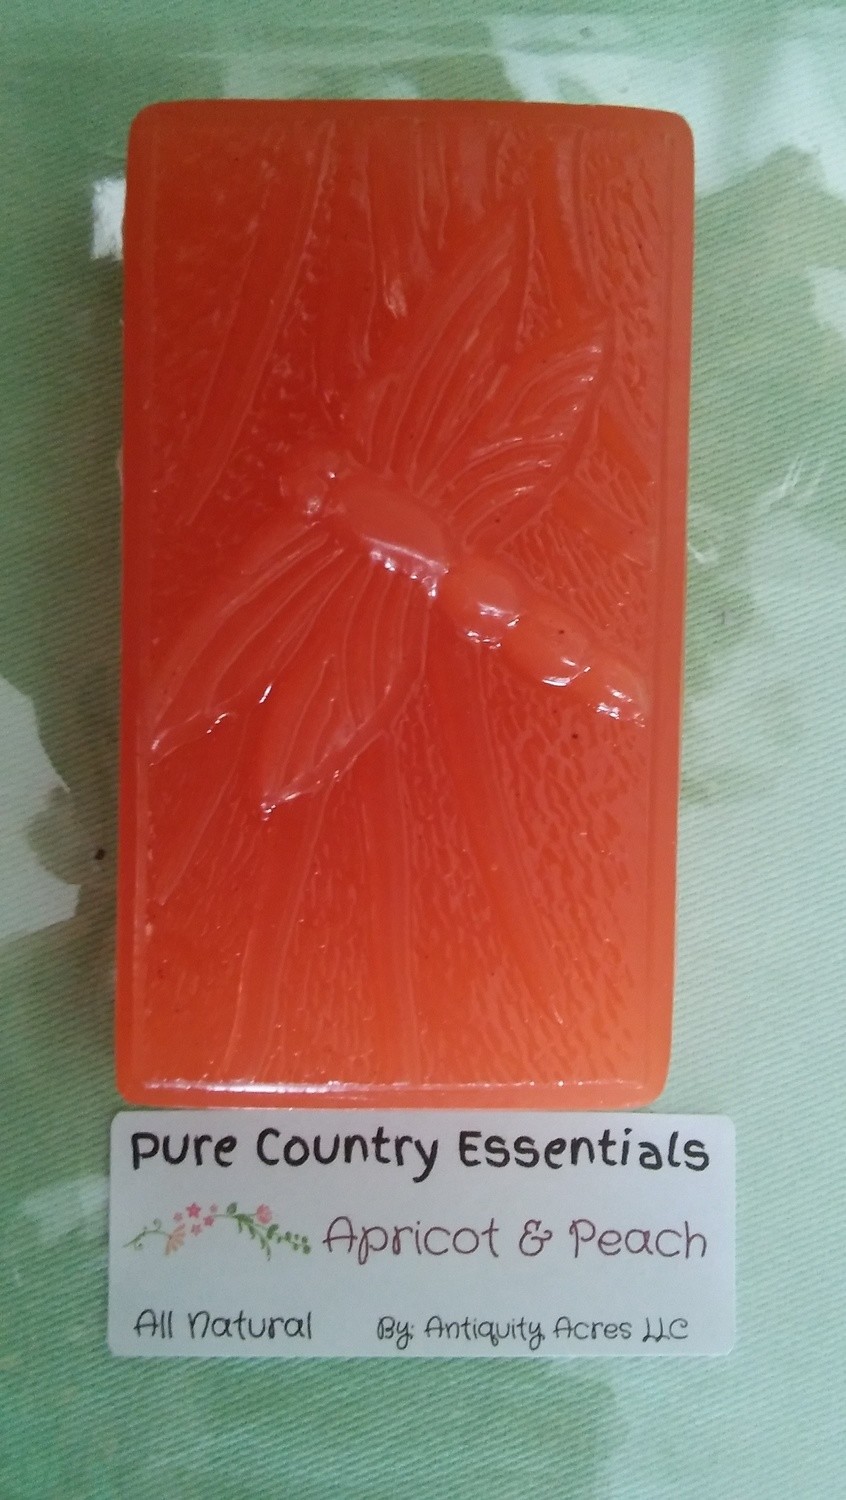 Pure Country Essentials Soap, Carrot Cucumber & Aloe Vera, Apricot & Peach Fragrance, Rectangle Dragonfly Design